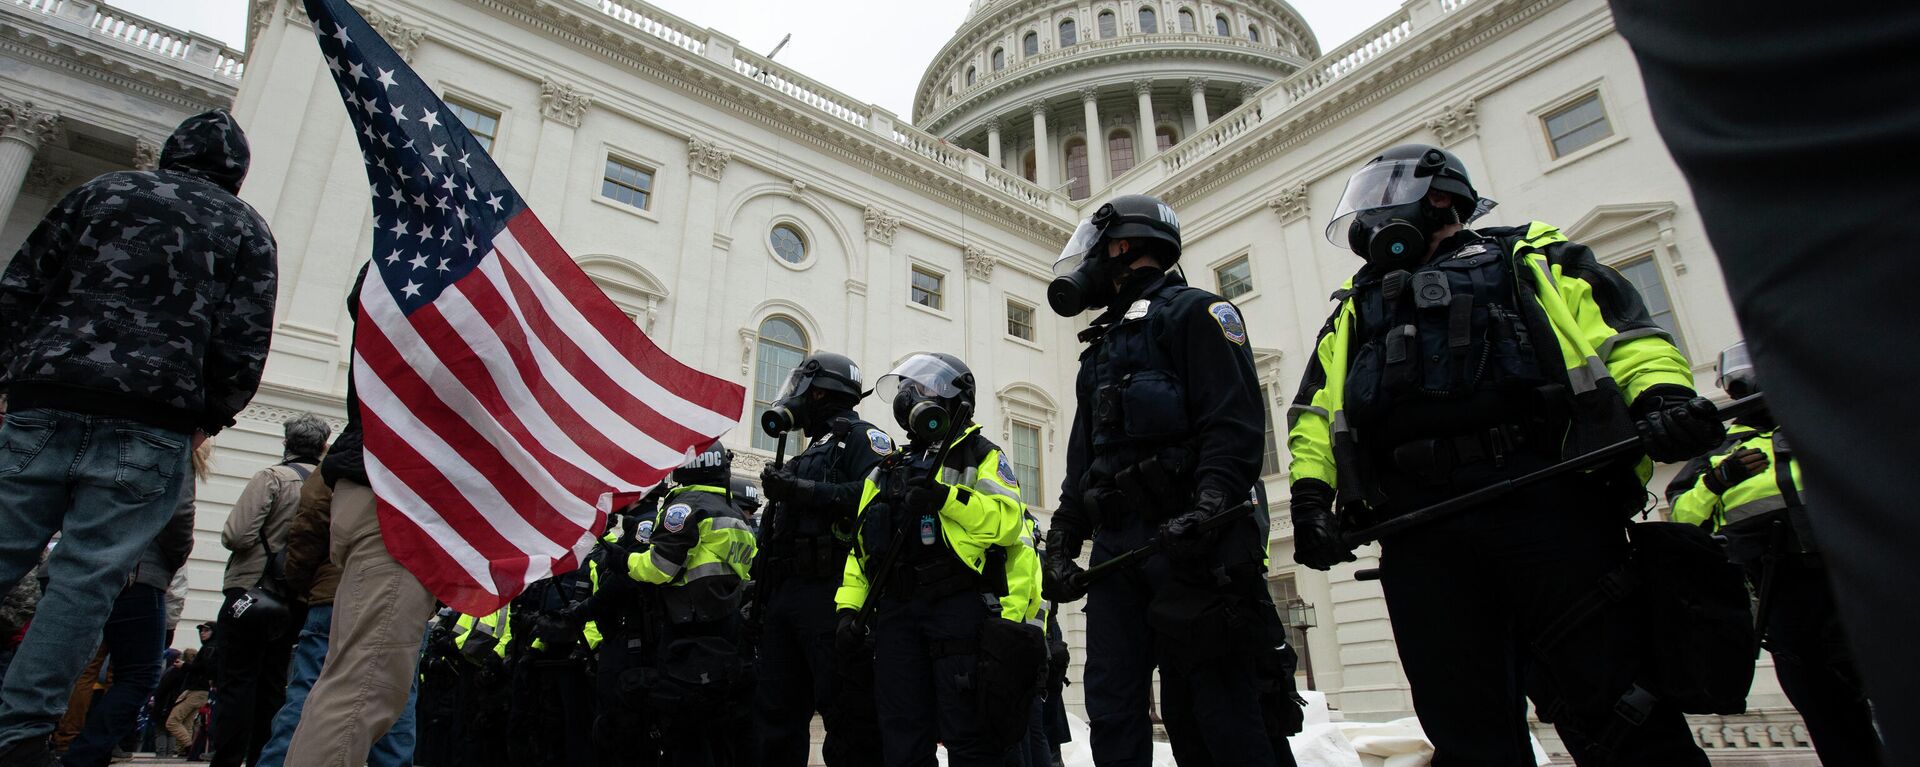 U.S. Capitol Police officers push back rioters who were trying to break into the U.S. Capitol on Jan. 6, 2021, in Washington. - Sputnik International, 1920, 03.01.2022